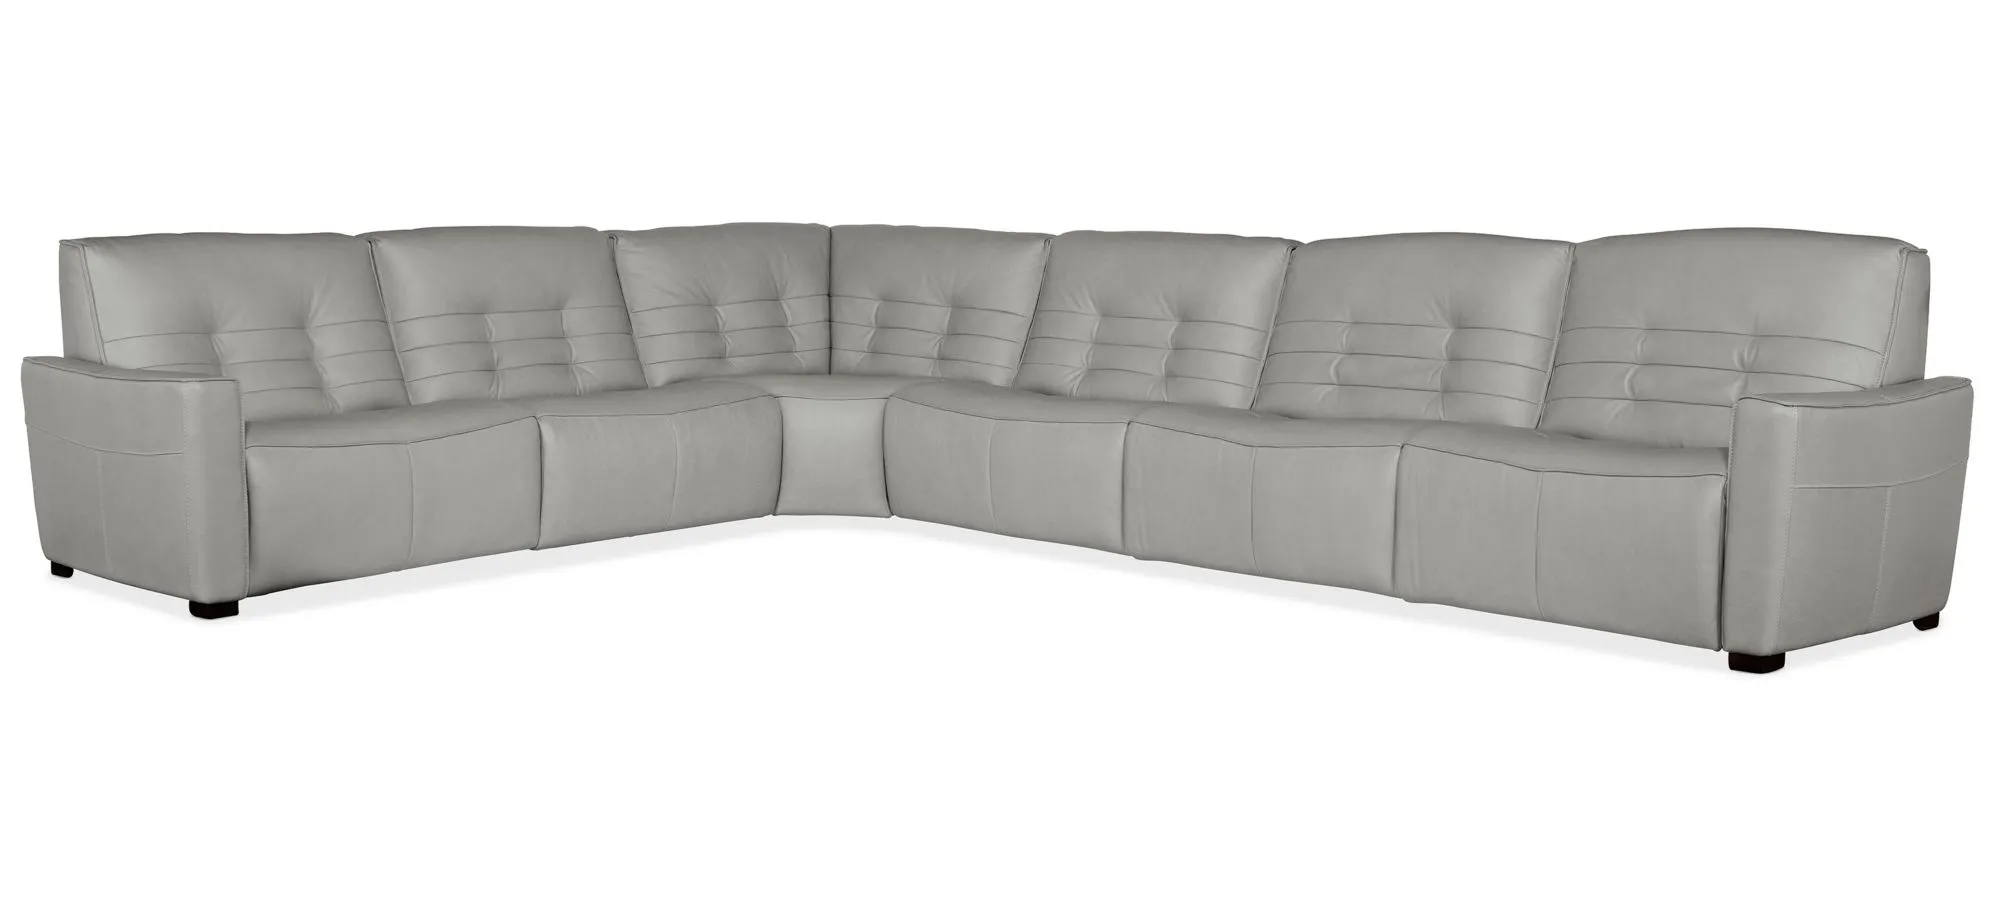 Reaux 6-pc. Power Reclining Sectional in Grey by Hooker Furniture